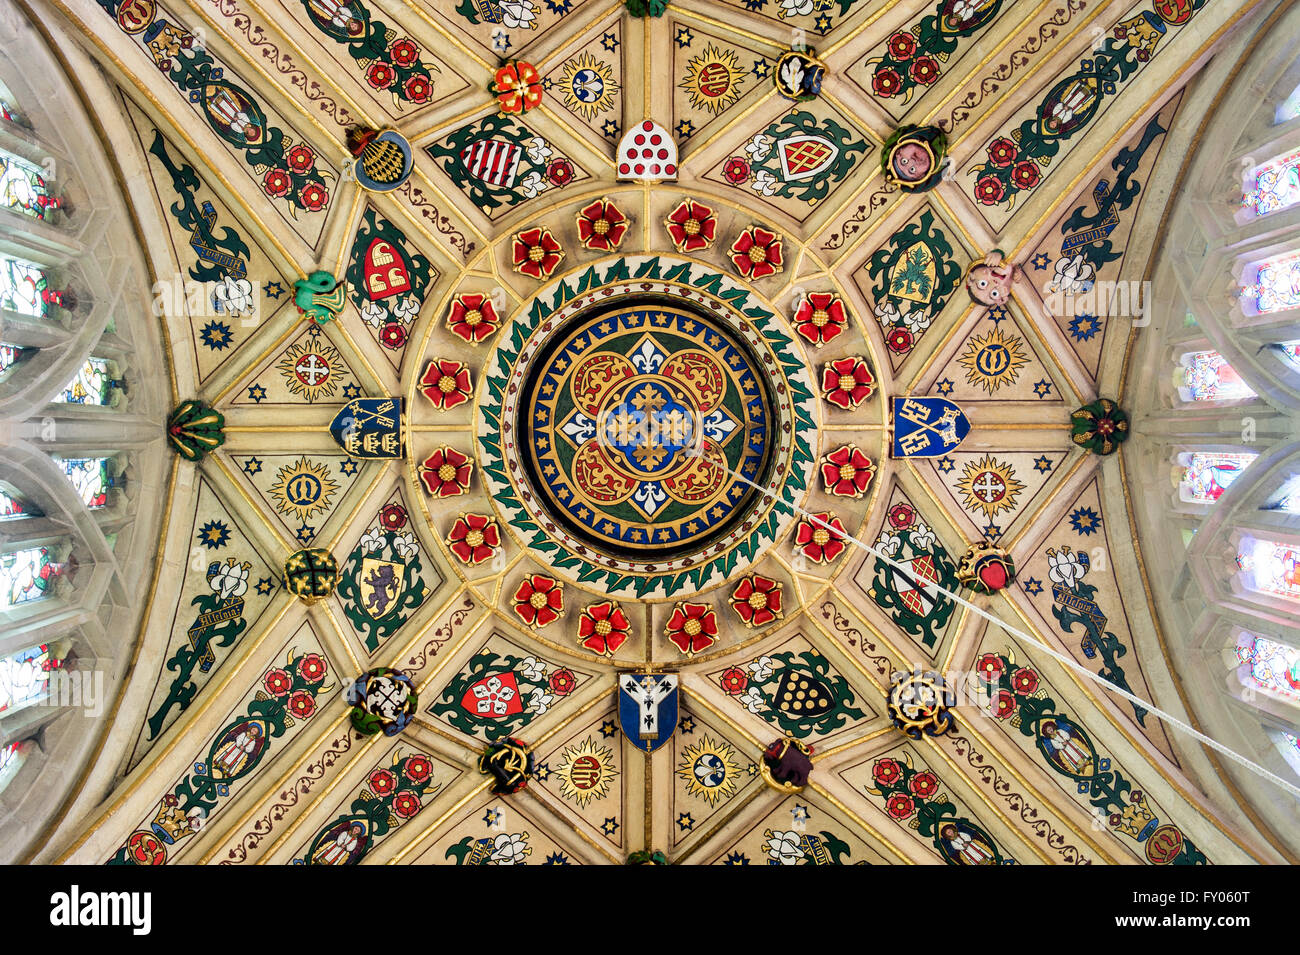 Decorative painted tower ceiling with heraldic shields in St Marys church, Kempsford, Gloucestershire. England Stock Photo